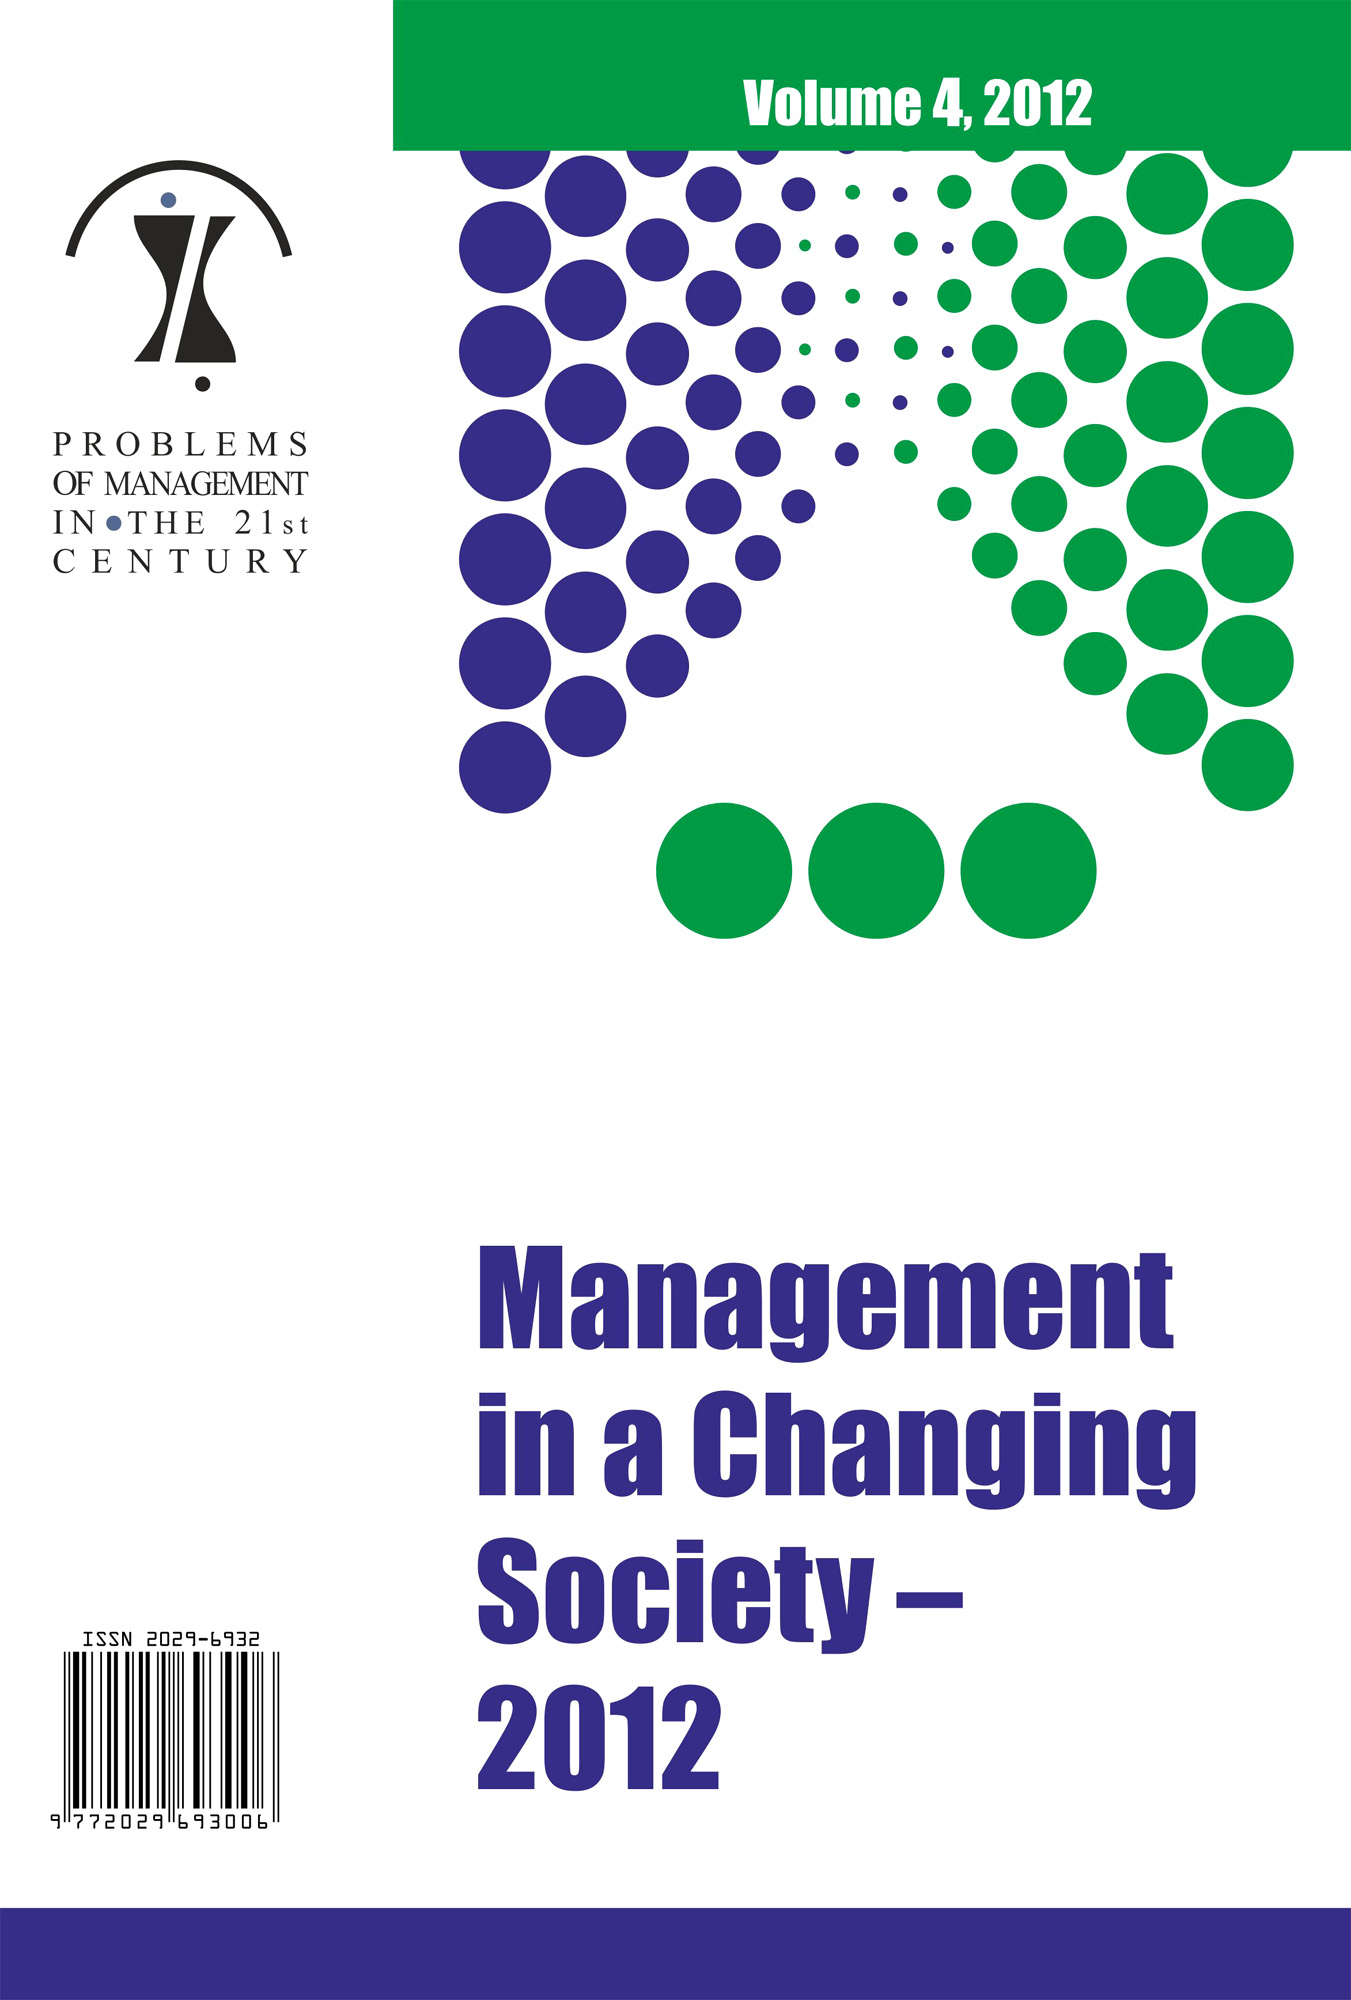 NON-FORMAL MANAGEMENT EDUCATION: SOME EVIDENCE FROM MANAGEMENT TRAINING BUSINESSES WEBSITES IN ESTONIA